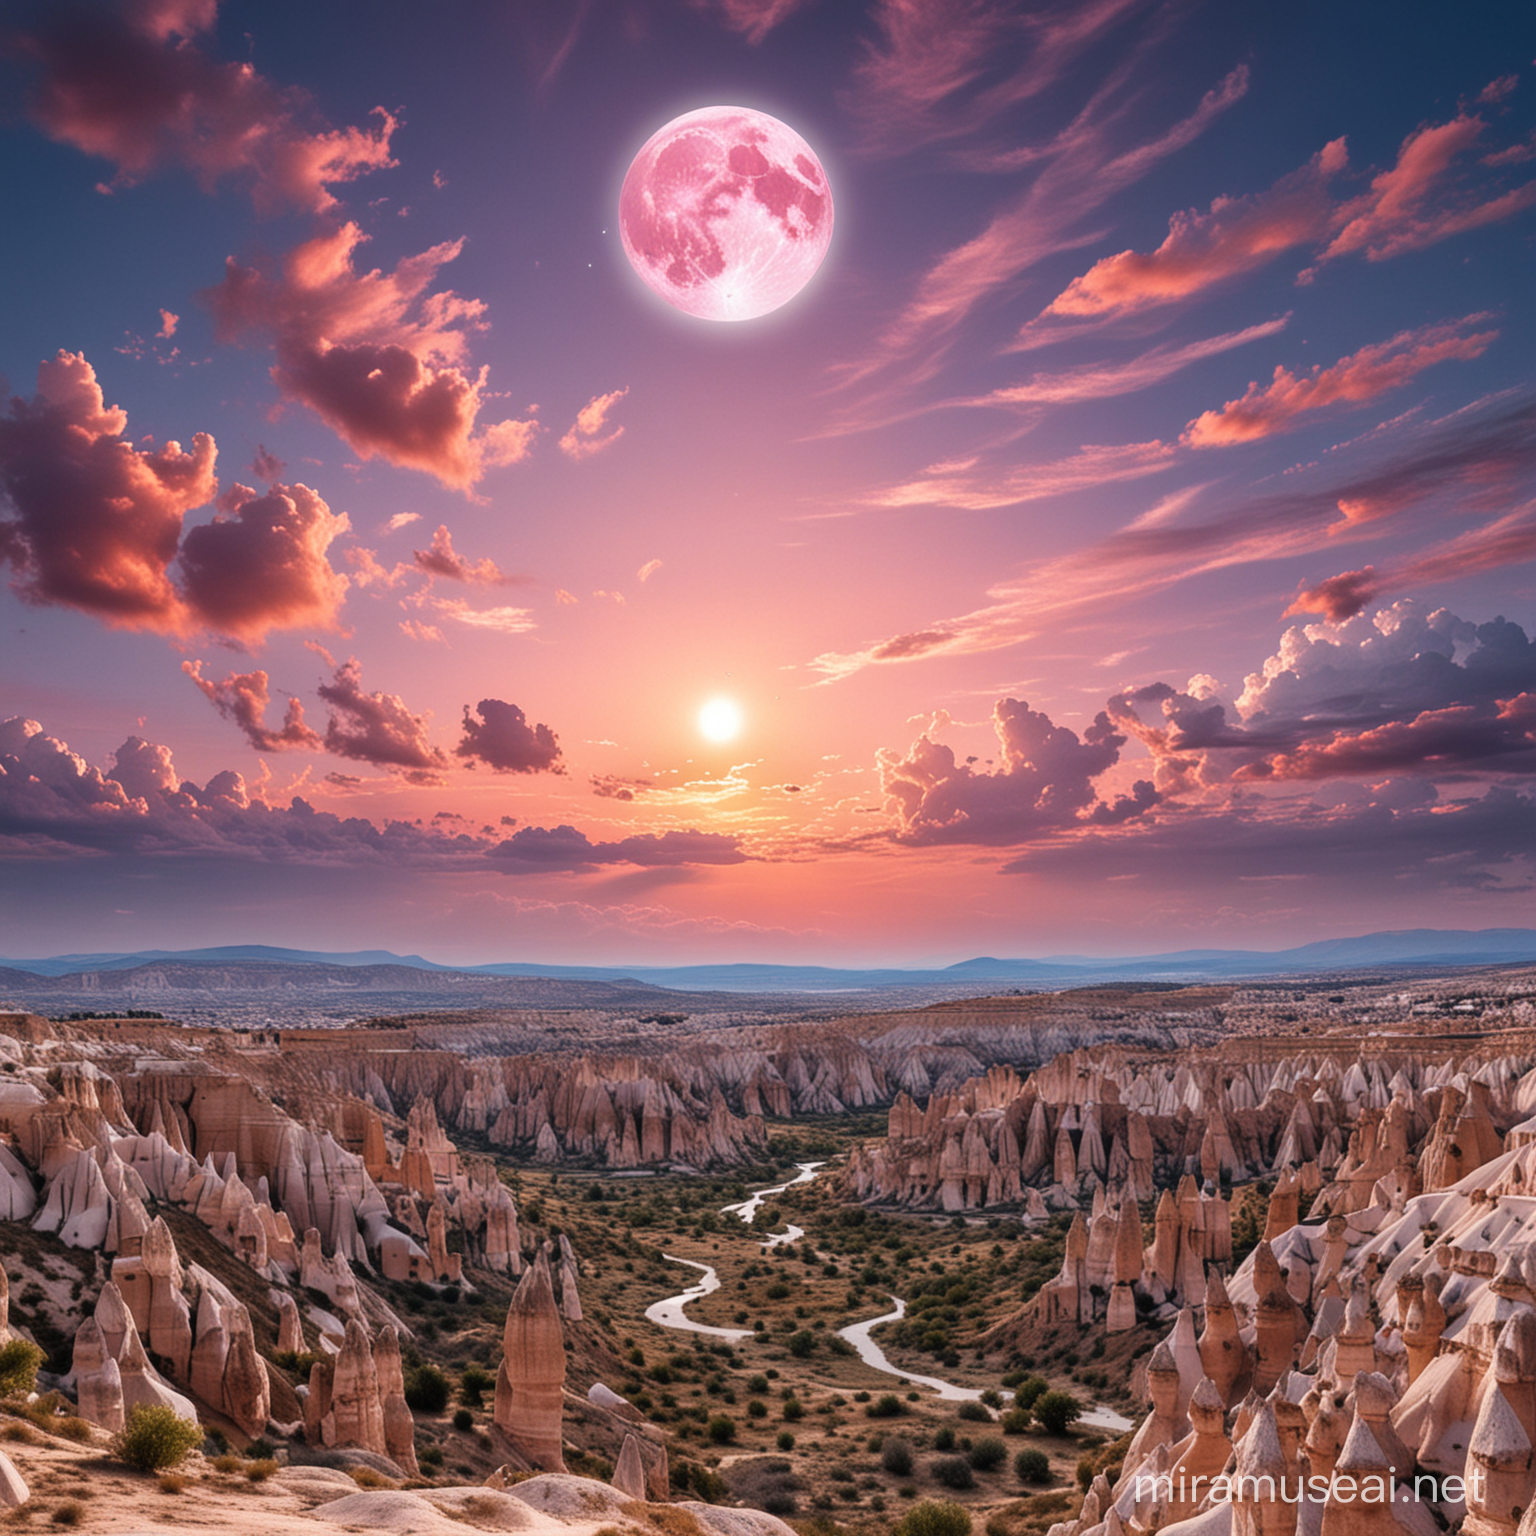 Surreal Sunset Sky with Moon and Floating Balls in Cappadocia